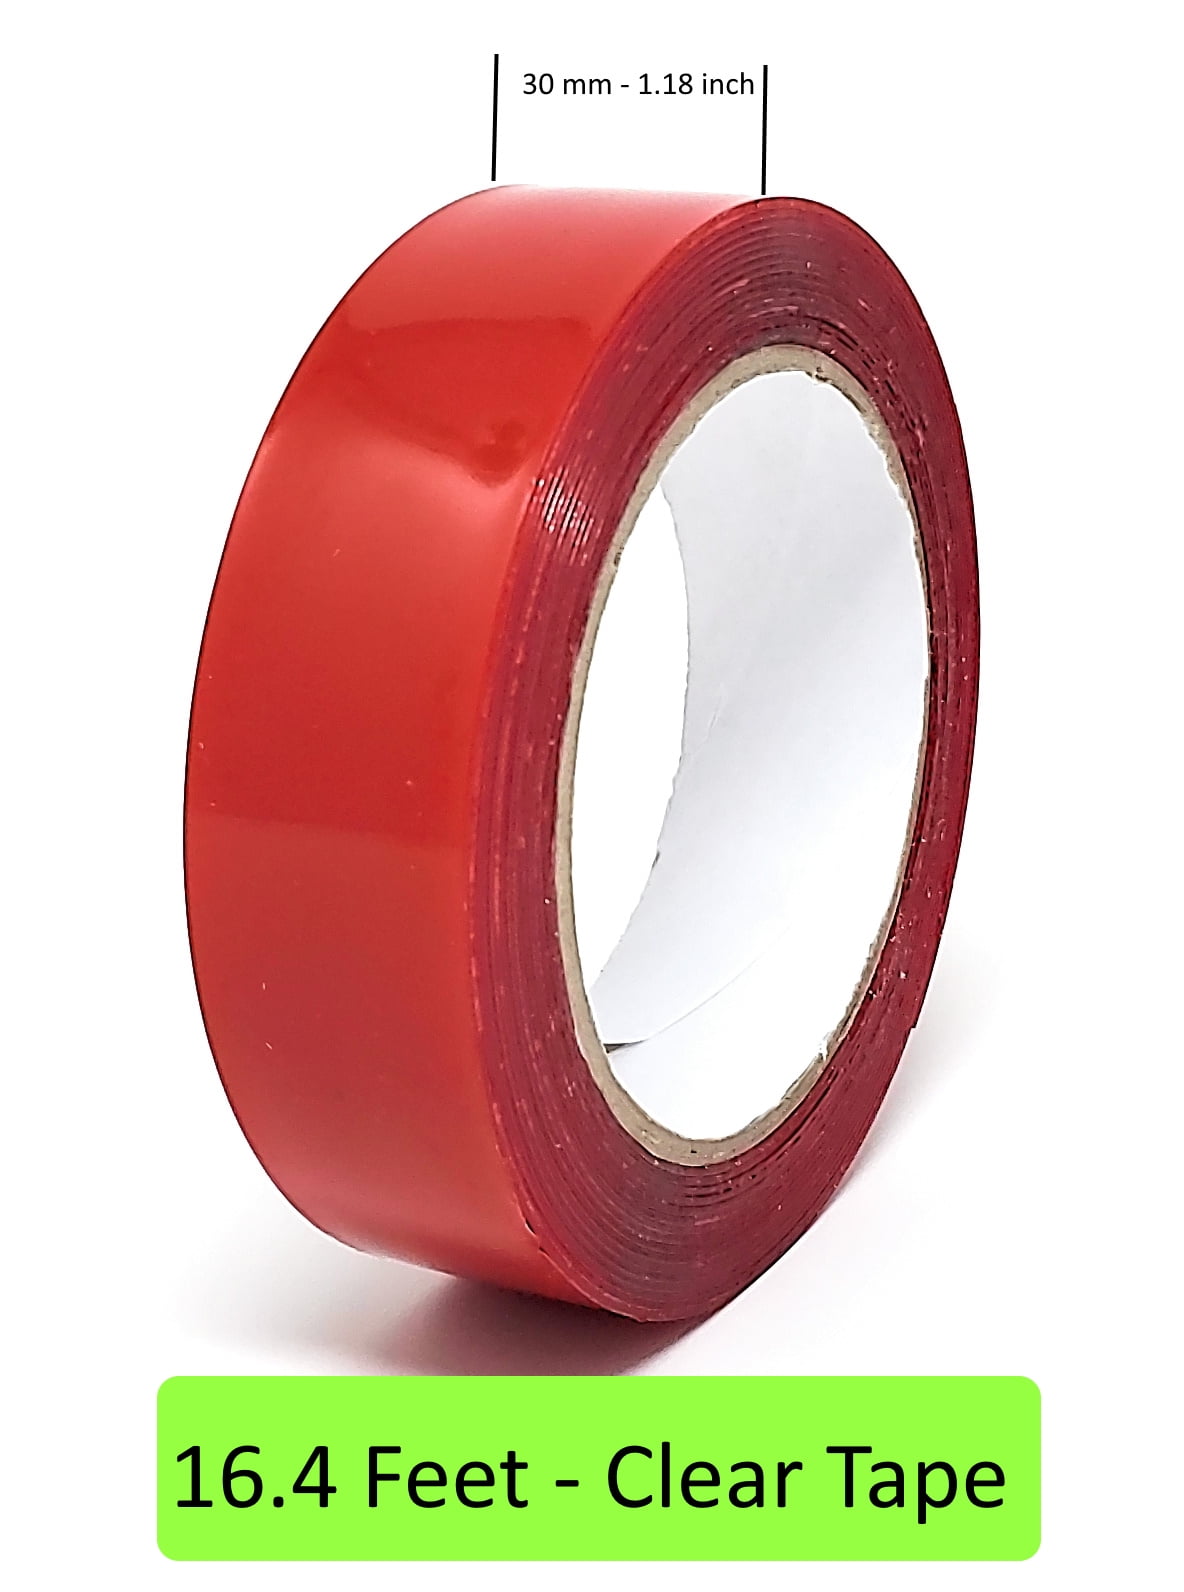 Double Sided Tape 3M VHB Mounting Tape Heavy Duty Waterproof Foam Tape 1 Inch x 18 Feet Length No Residue for Home Office Automotive Decorations and LED Strip Lights 1 Inch 